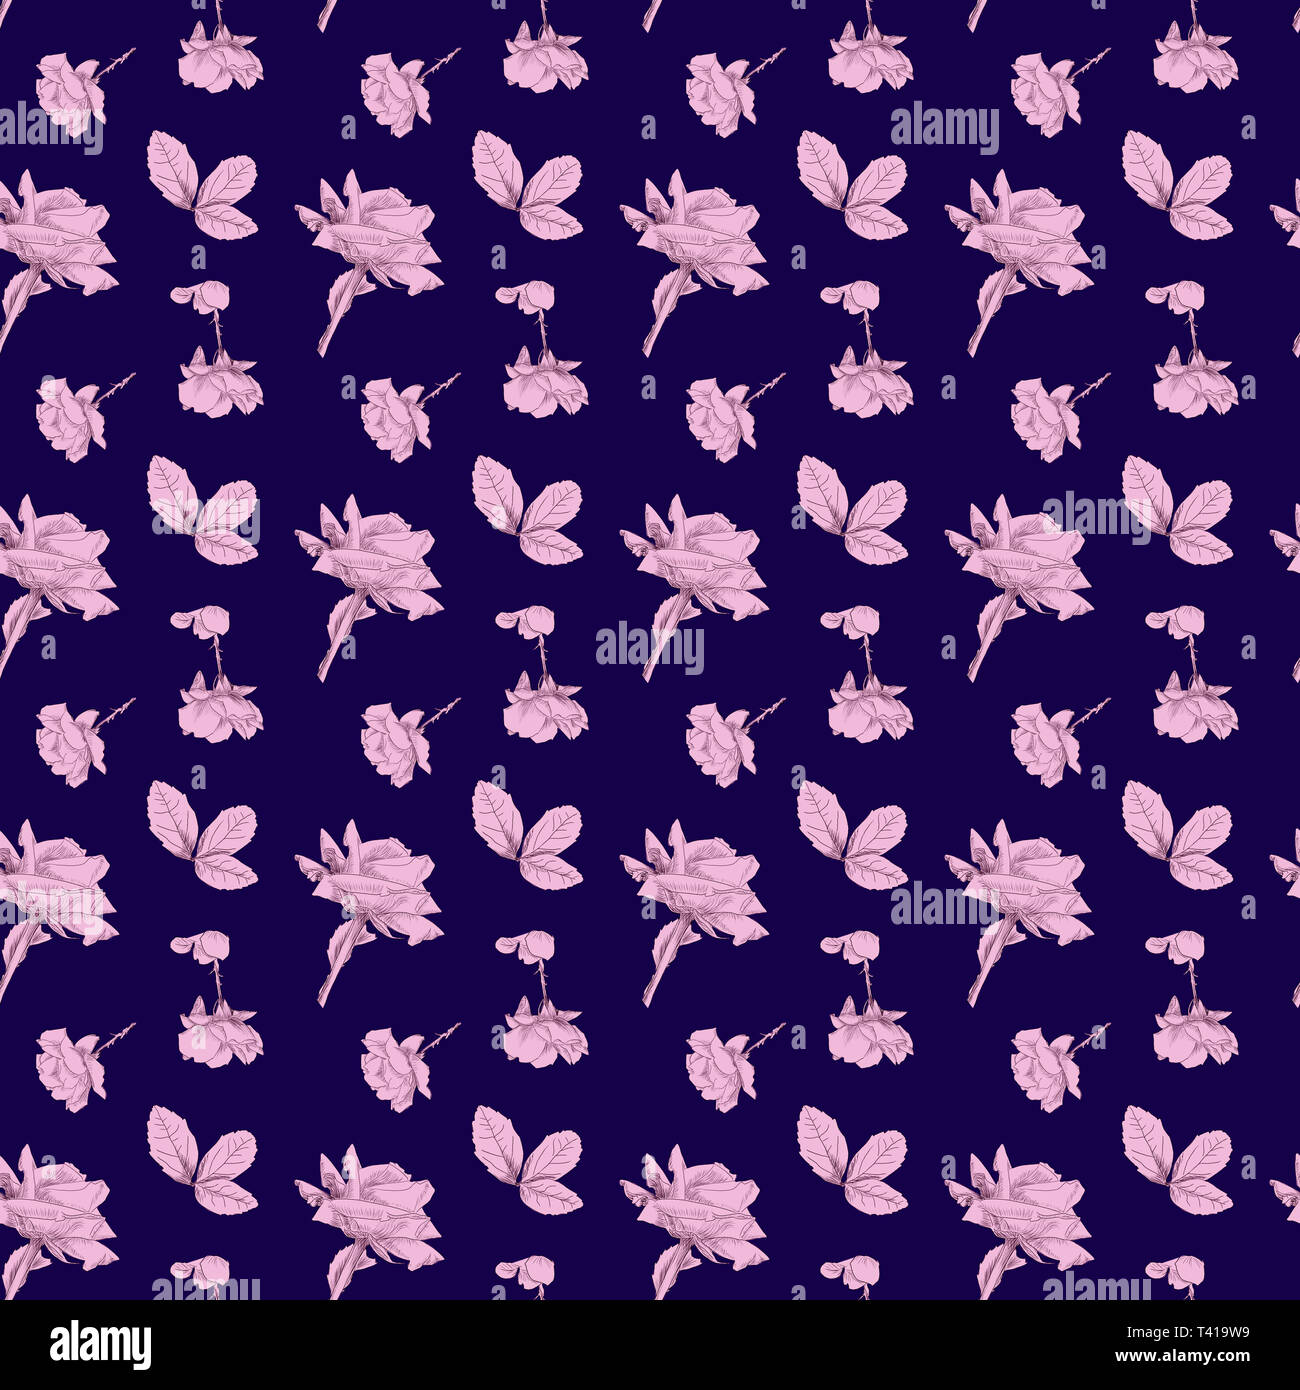 Pattern of hand drawn roses in pink with a blue colored background 1000x1000 px repeat by jziprian Stock Photo